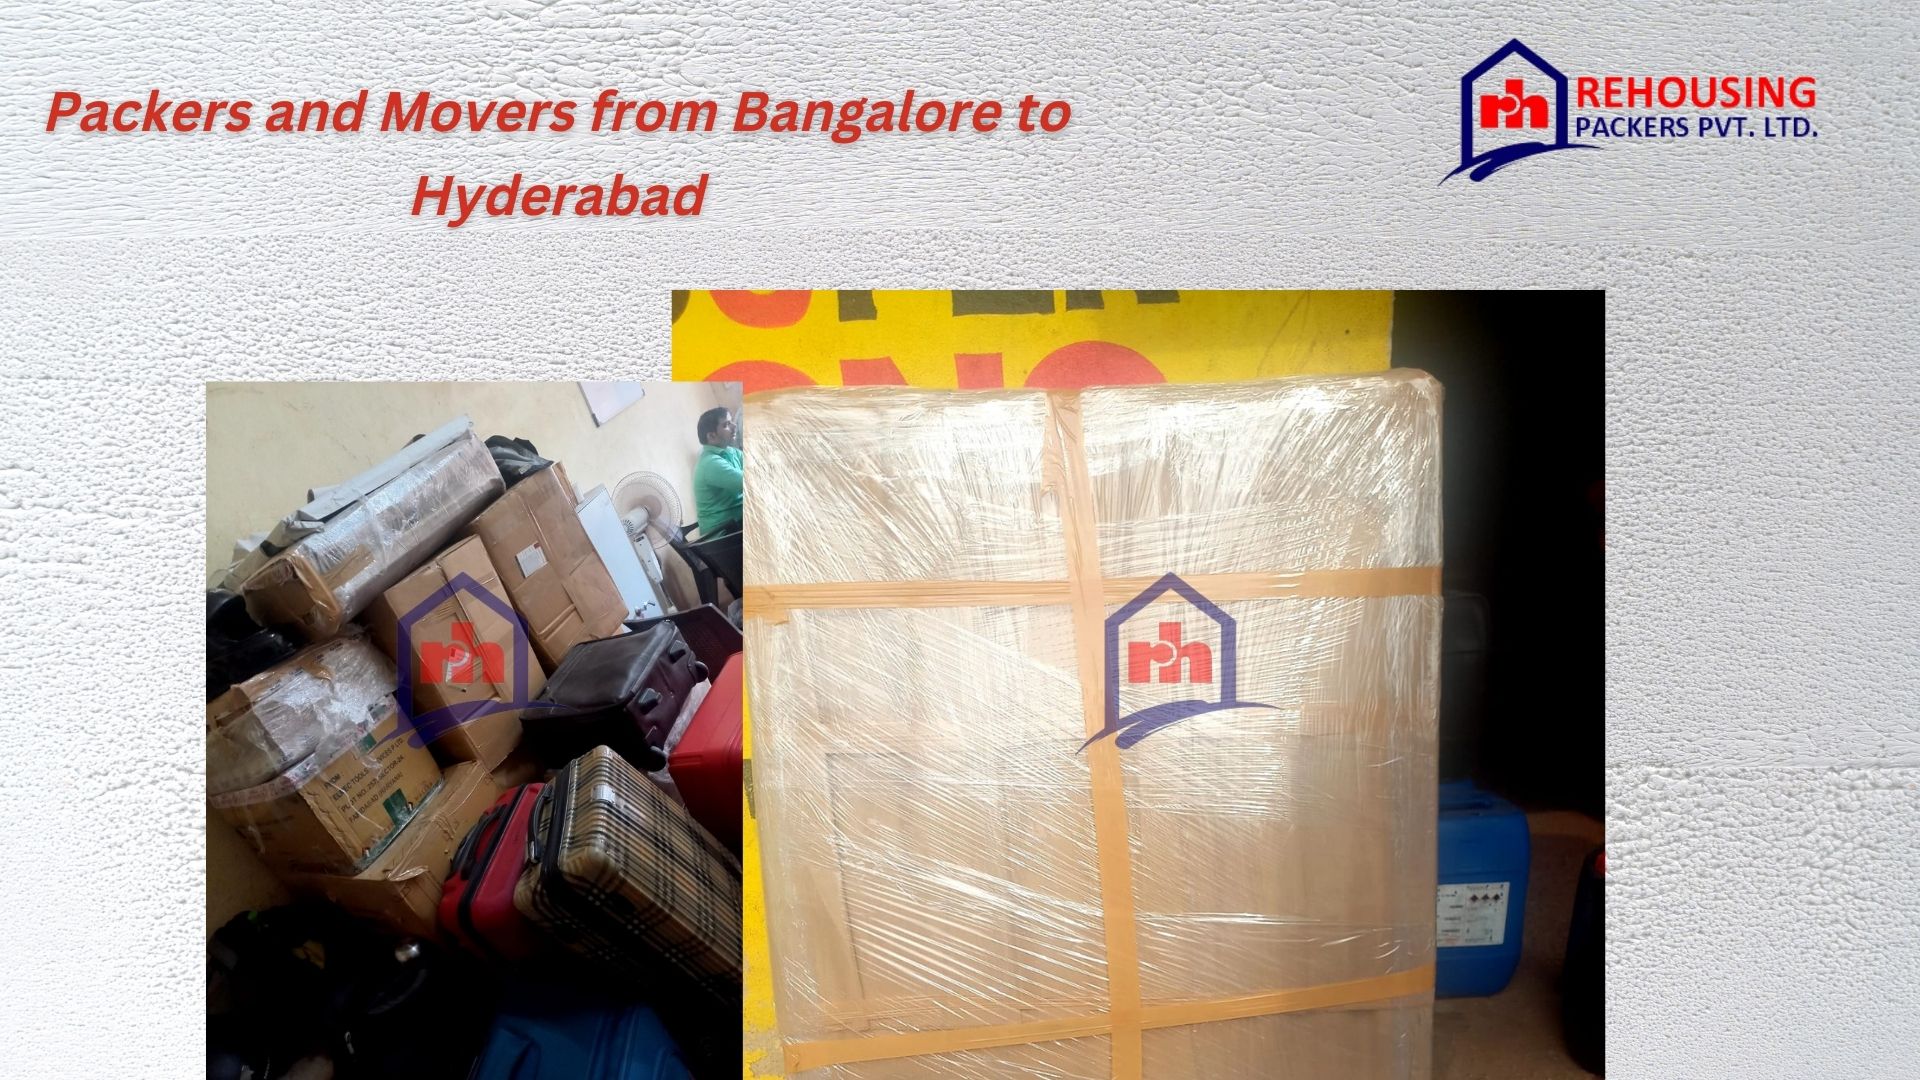 Packers and Movers from Bangalore to Hyderabad | Charges Rehousing